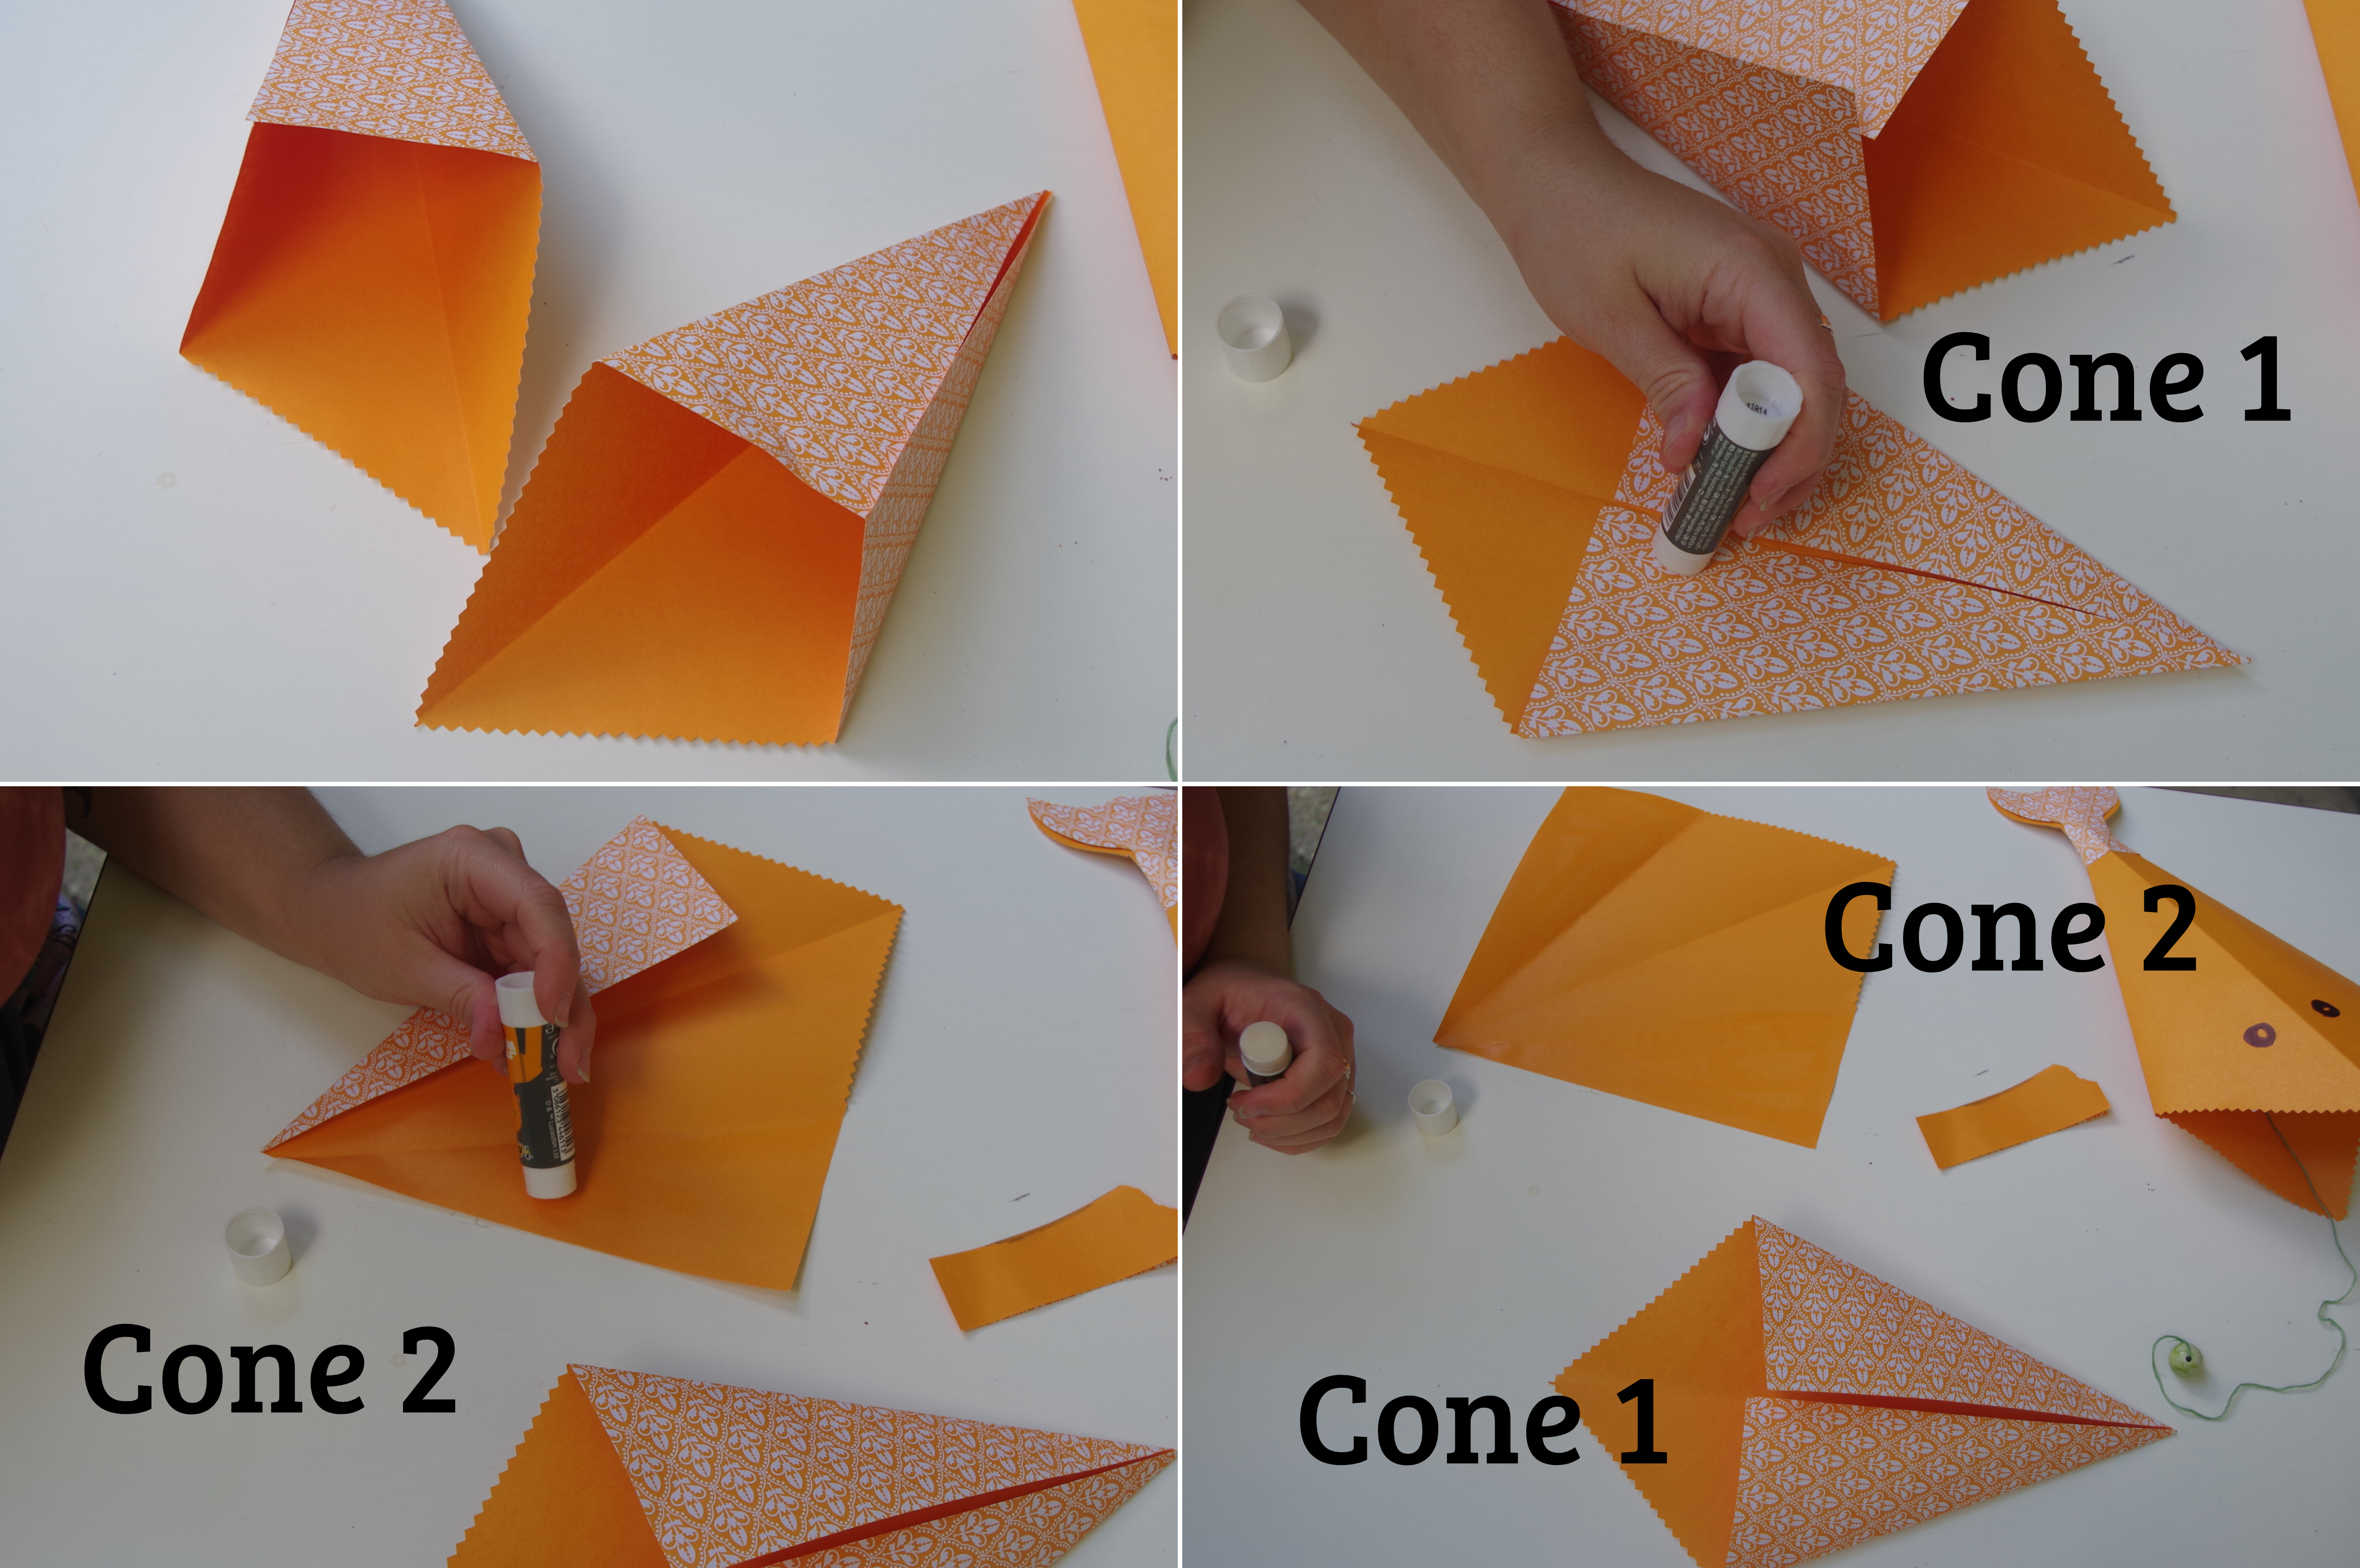 4 images of the process of gluing the orange paper cone into place